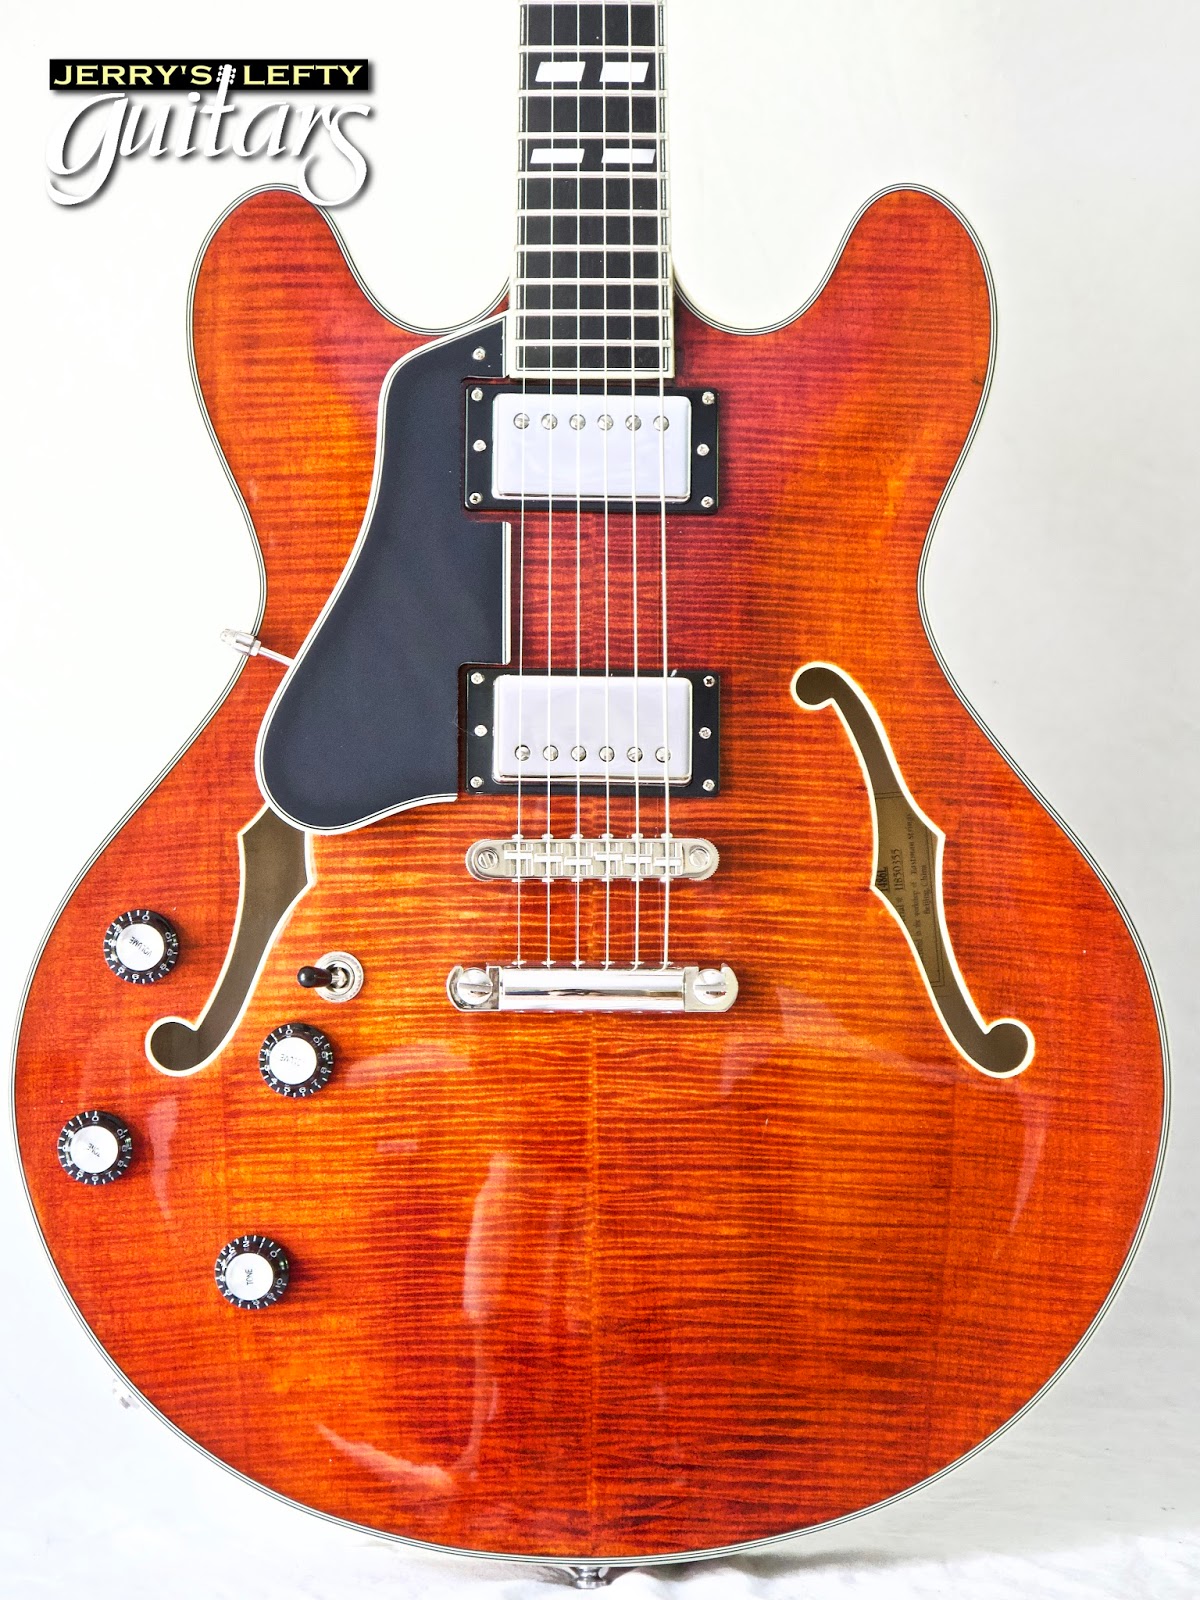 Jerry's Lefty Guitars newest guitar arrivals. Updated weekly!: Eastman T486  Classic left handed guitar 4/7/18